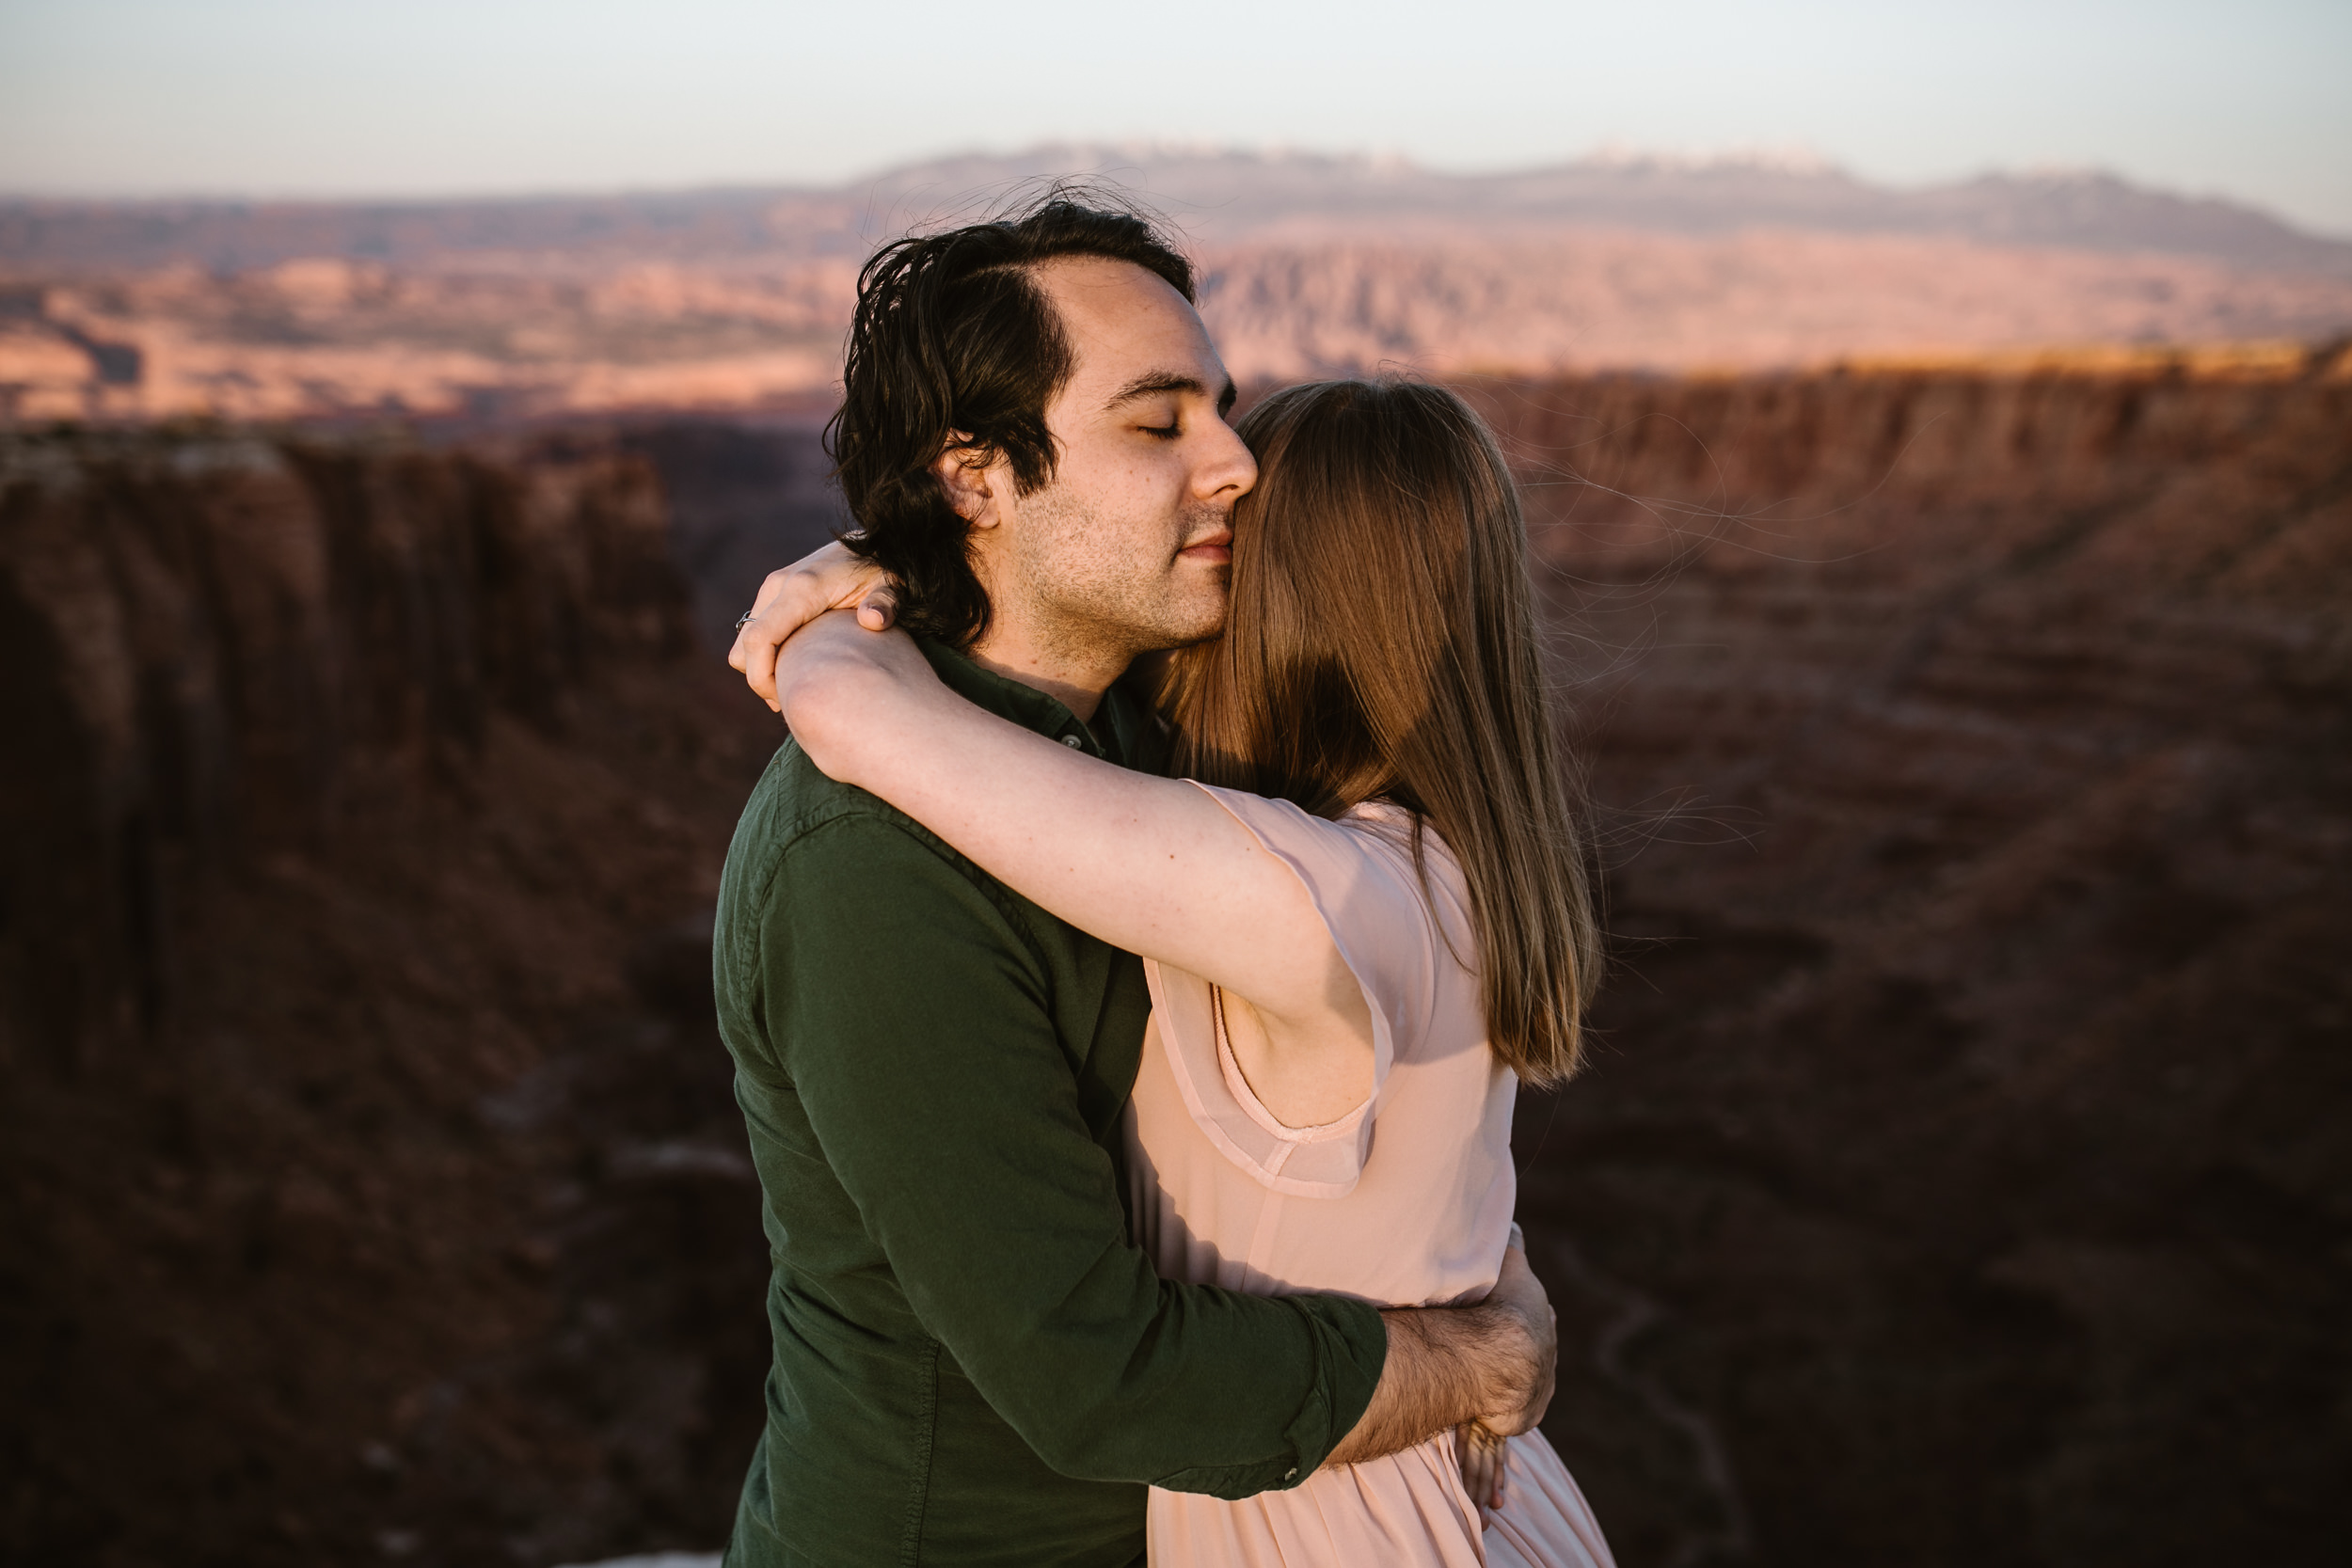 michelle + damian's post-elopement adventure session in moab | moab elopement photographer